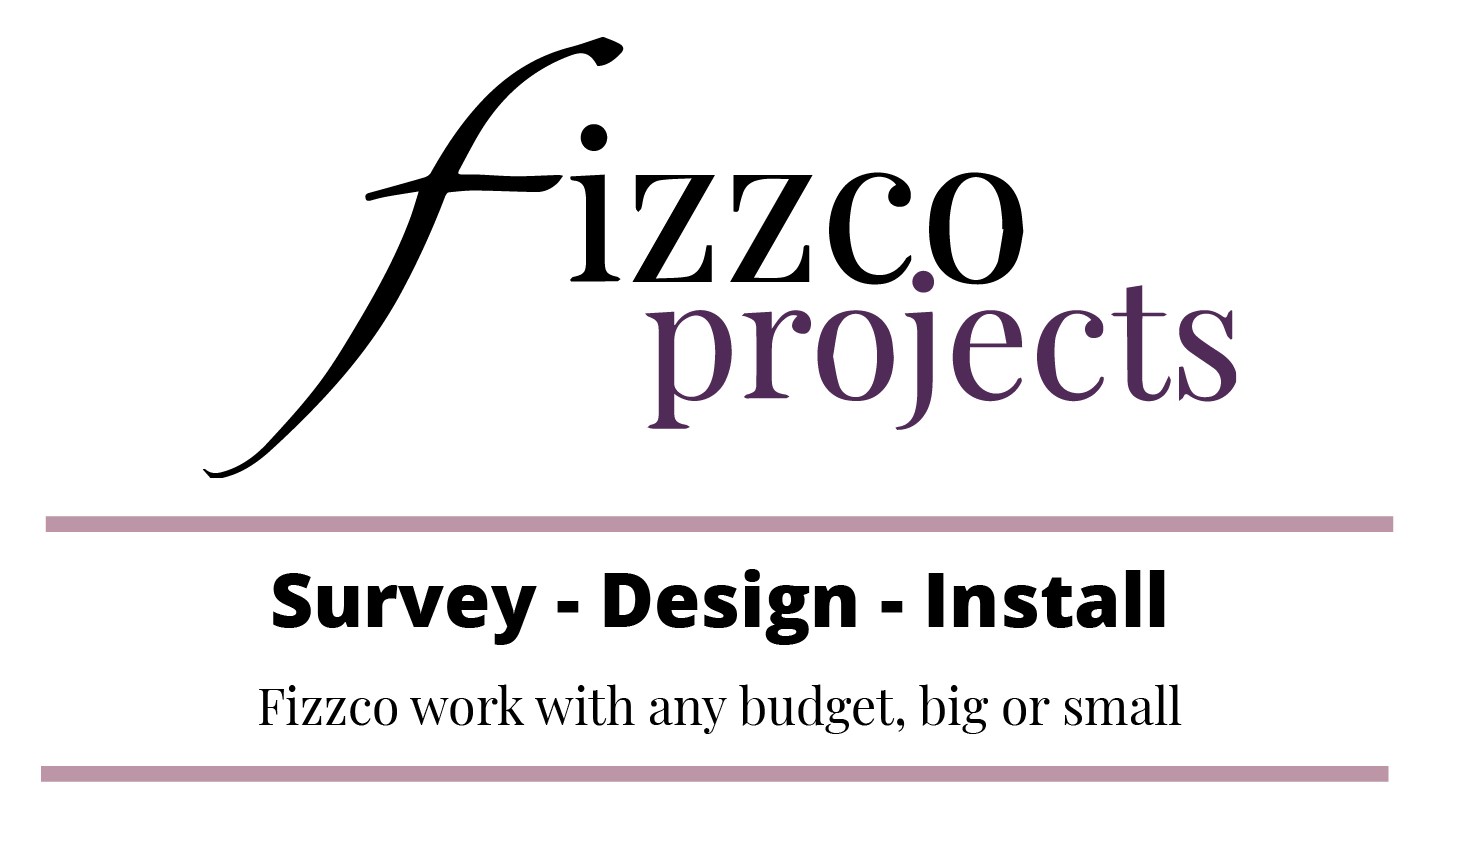 about fizzco